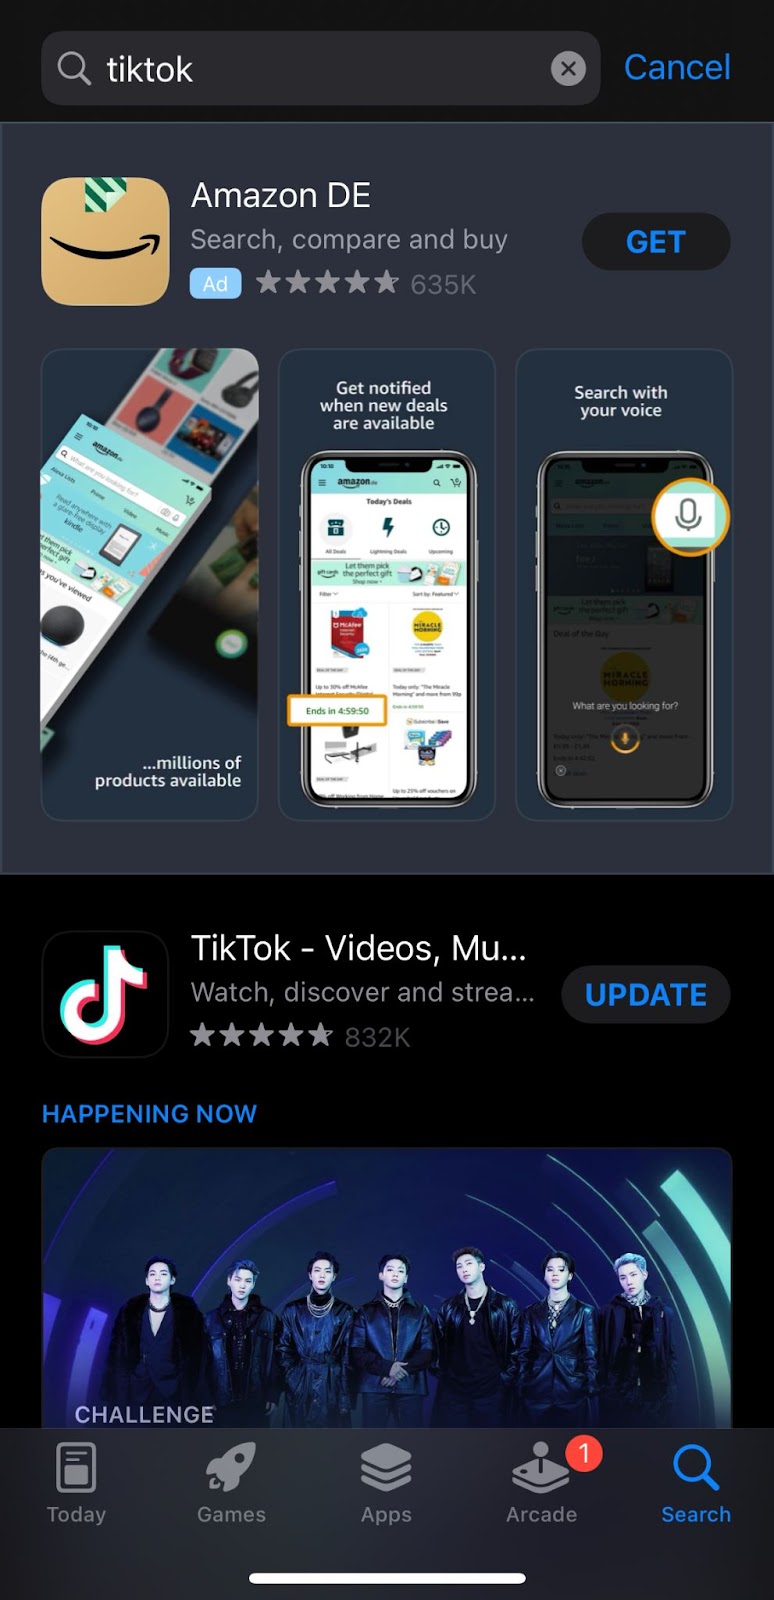 Google Ads App Campaign result example for the search "tiktok"